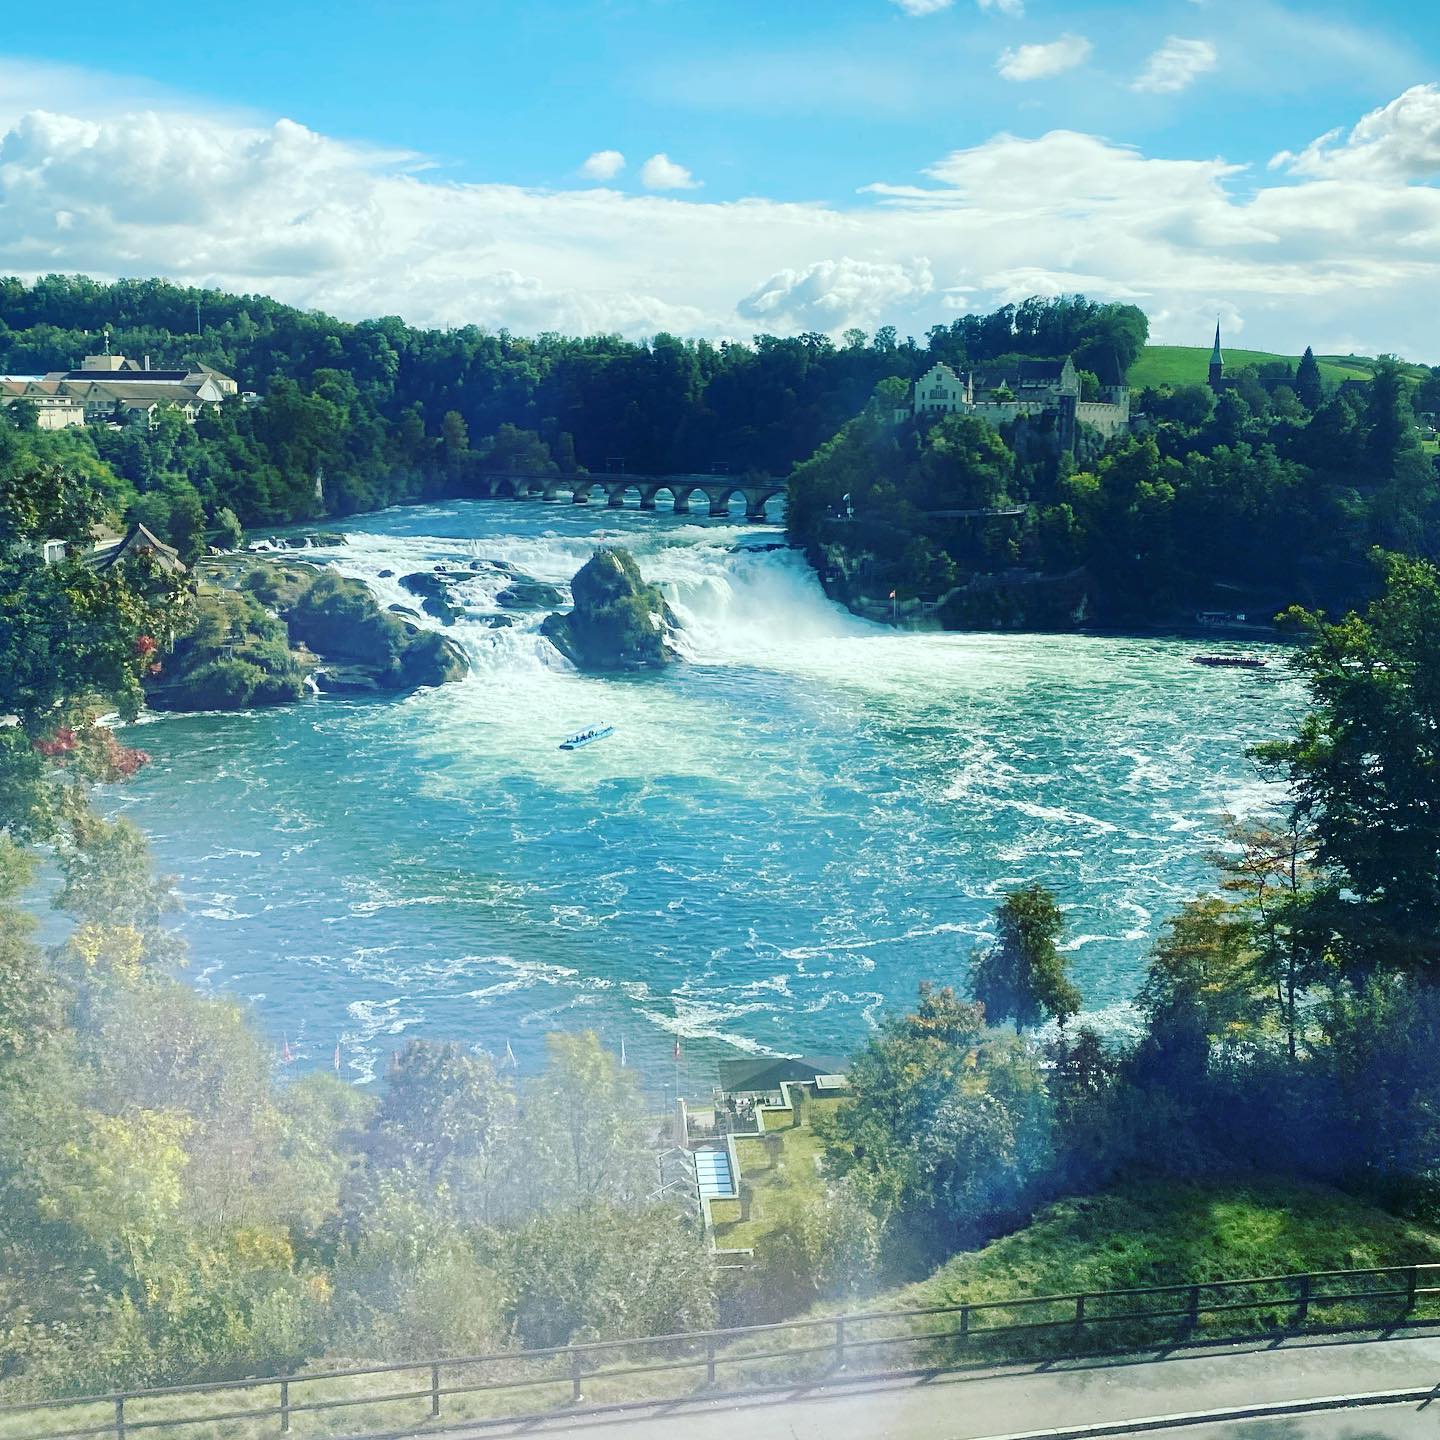 The waterfall in Schaffhausen, get a great view from the 🚂